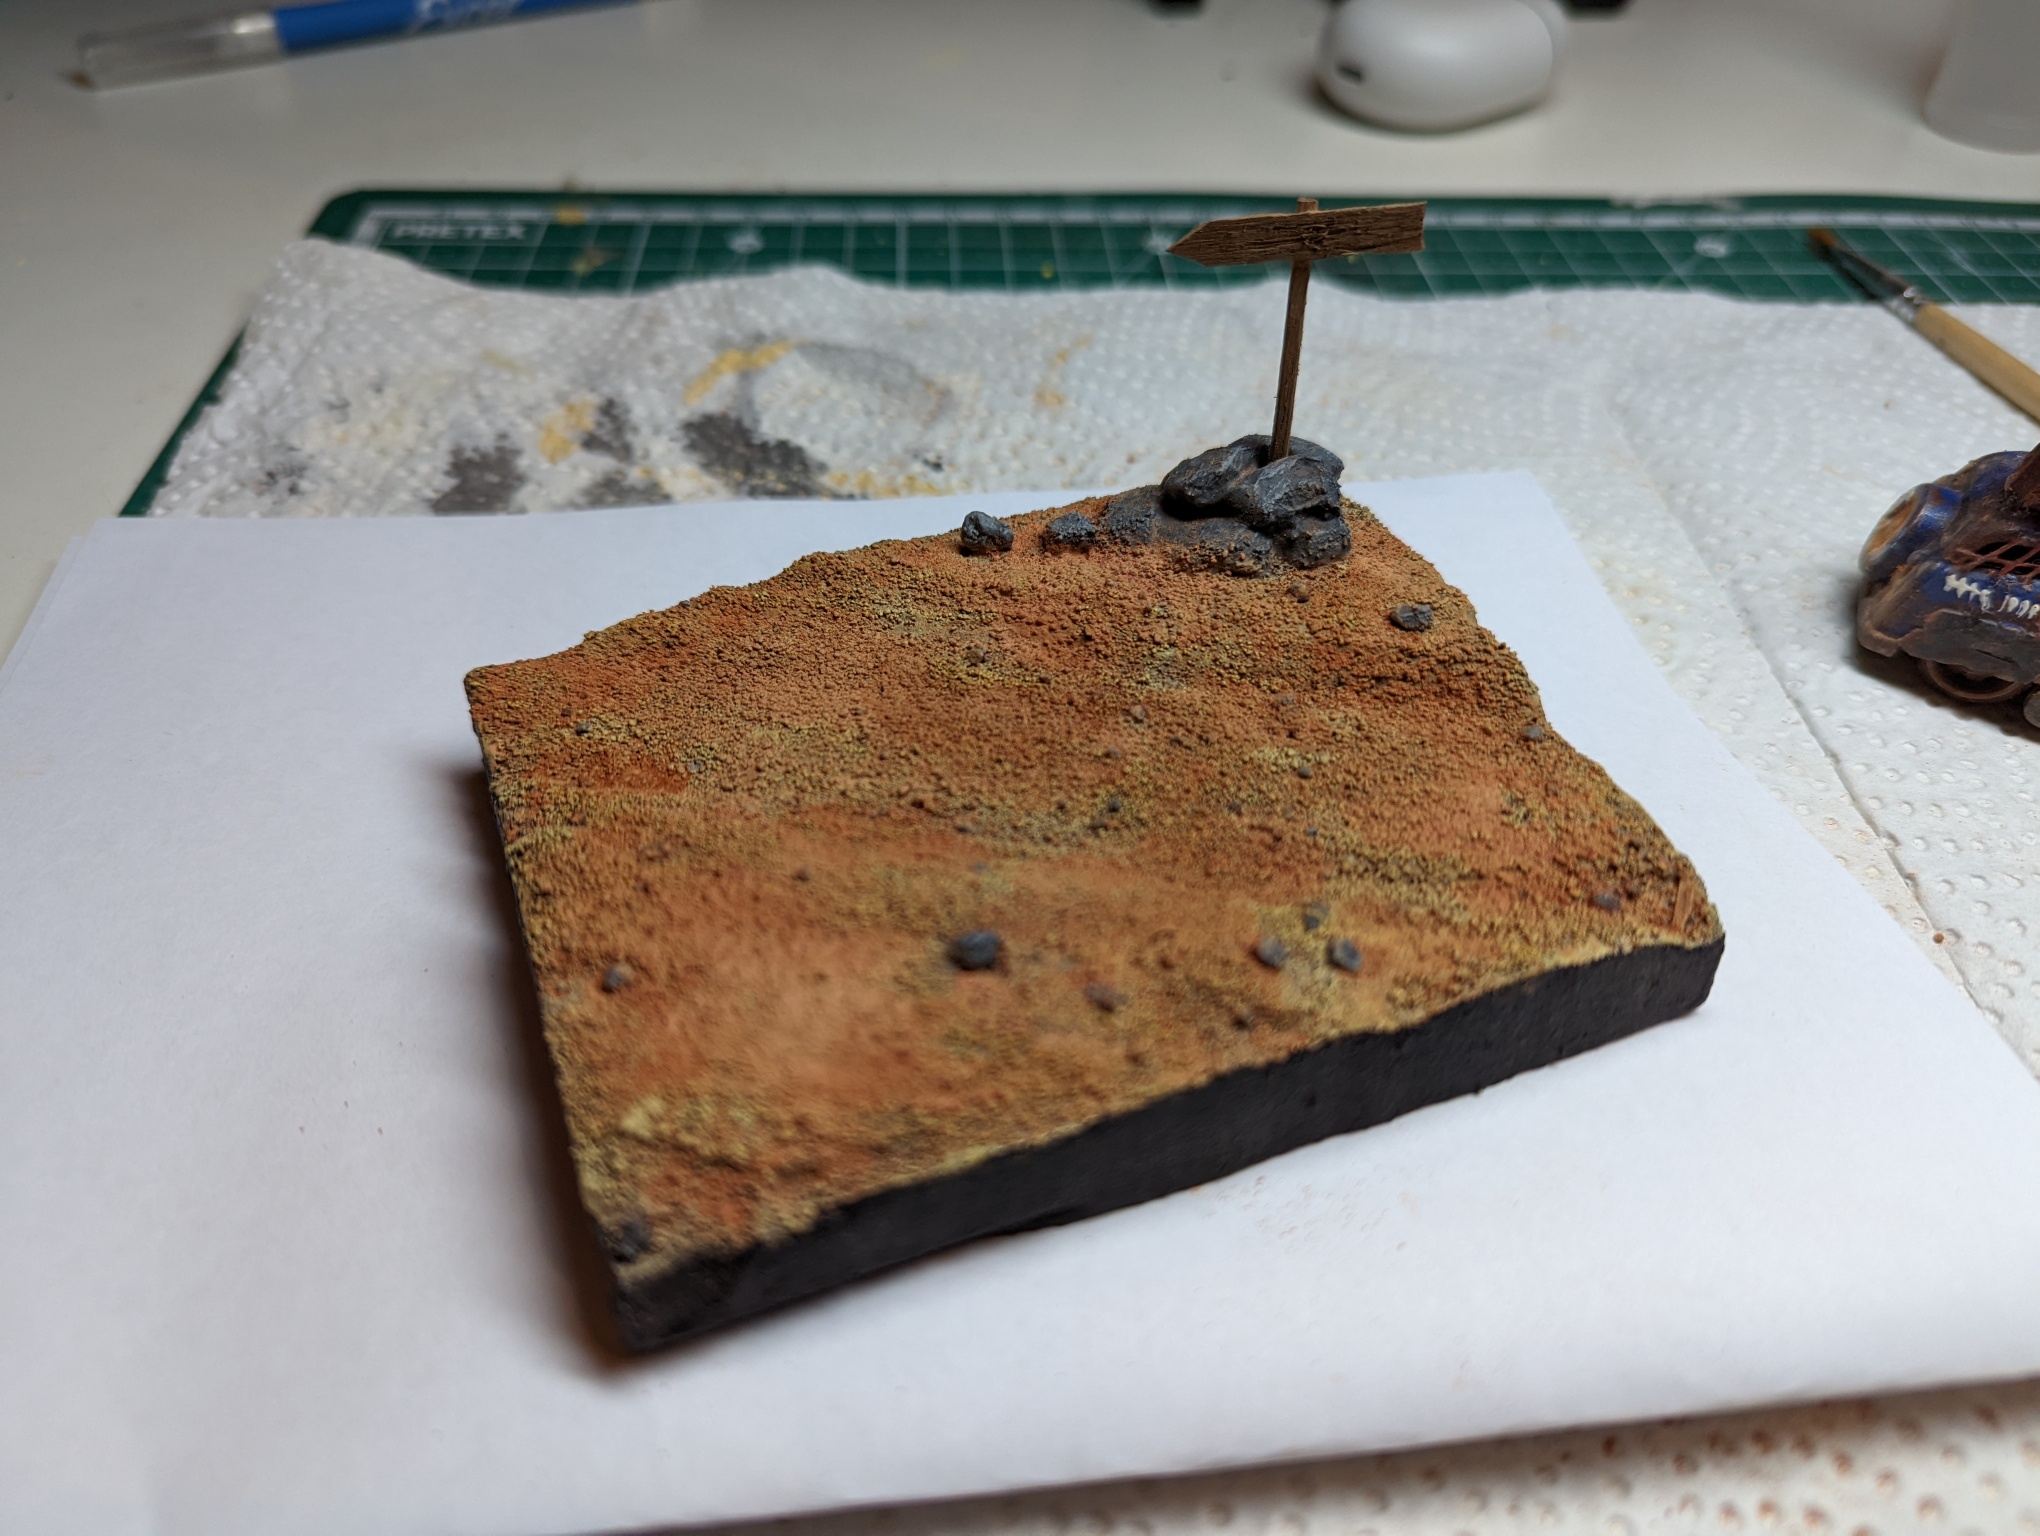 And finished with homemade powders from soft pastels. I also painted the stones in the pile and many other smaller ones scattered on the terrain.